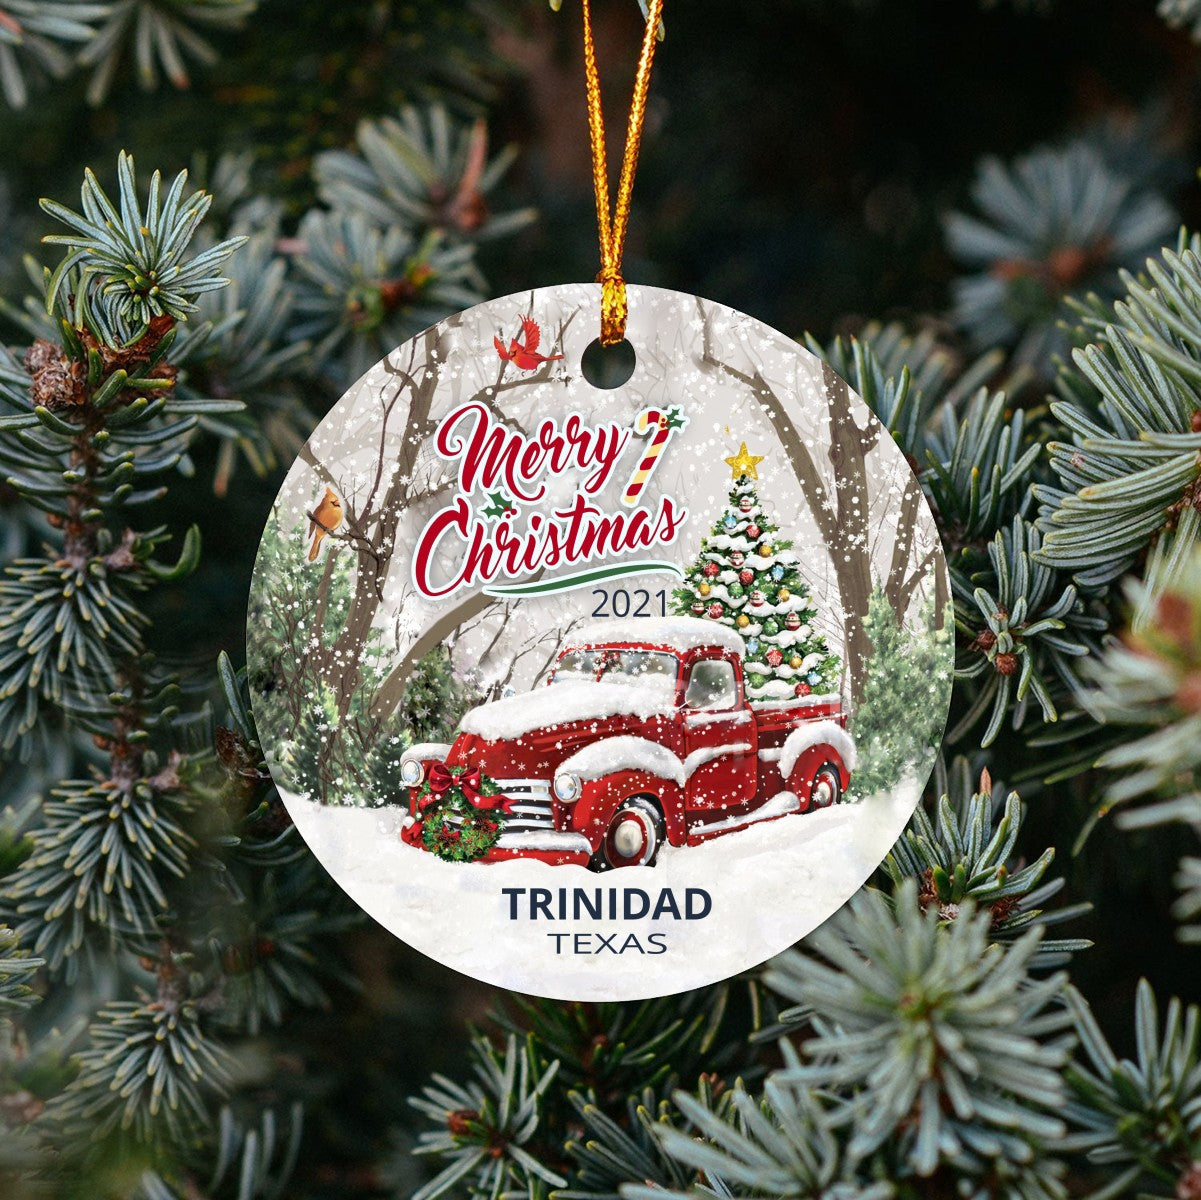 Christmas Tree Ornaments Trinidad - Ornament With Name City, State Trinidad Texas TX Ornament - Red Truck Xmas Ornaments 3'' Plastic Gift For Family, Friend And Housewarming